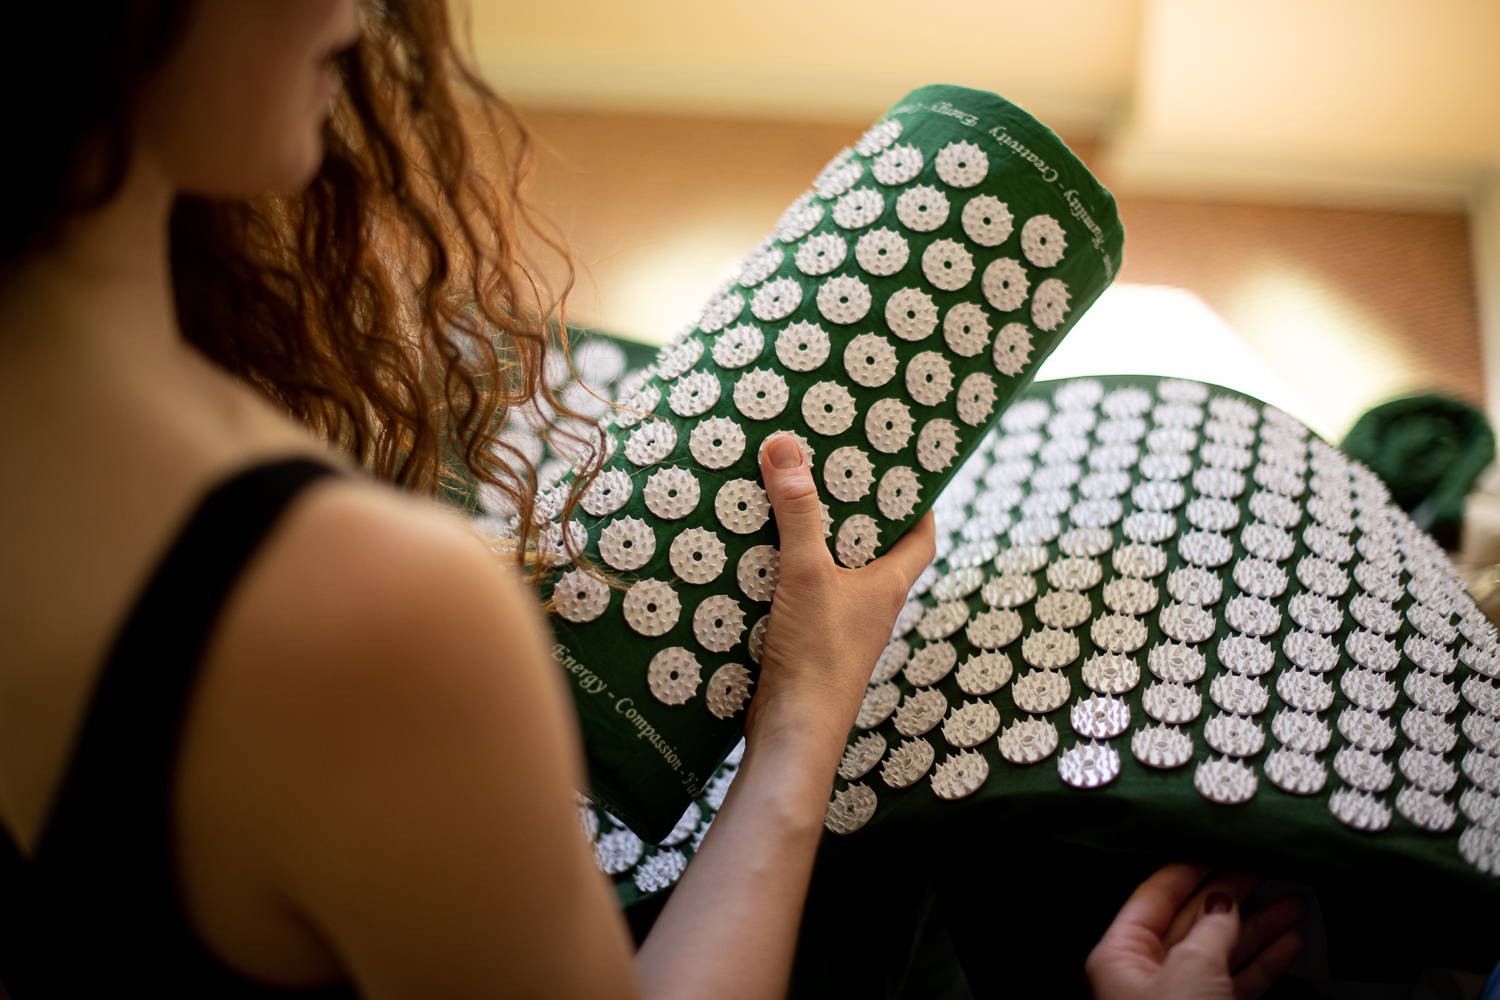 The Shakti Acupressure Mat - Total mind and body relaxation